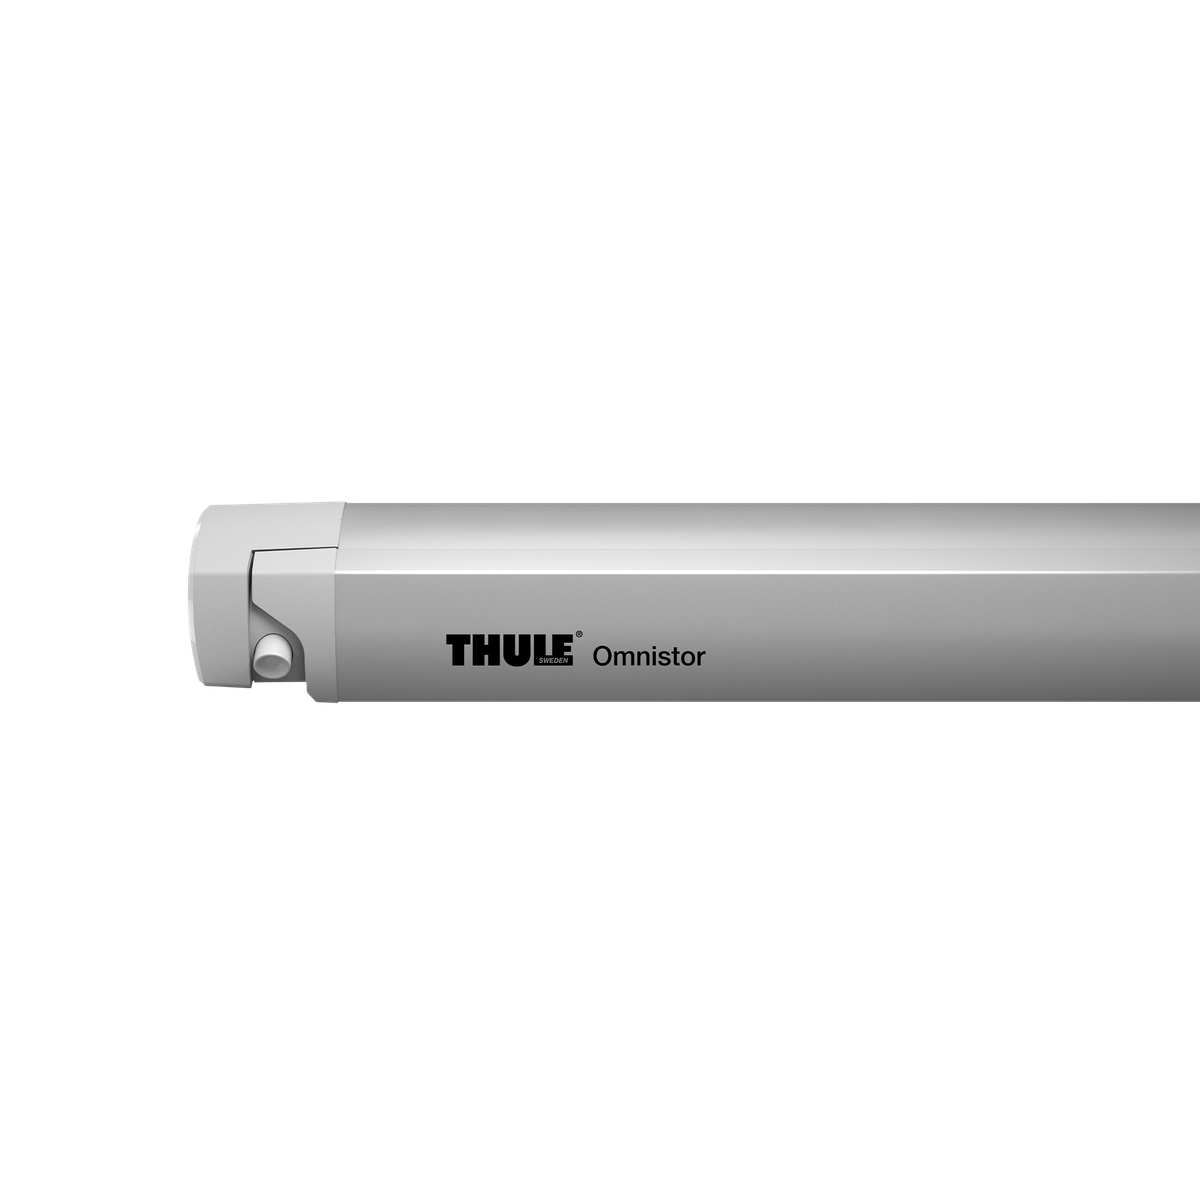 Thule Omnistor 6300 motorized roof awning 5.03x2.50 anodised gray